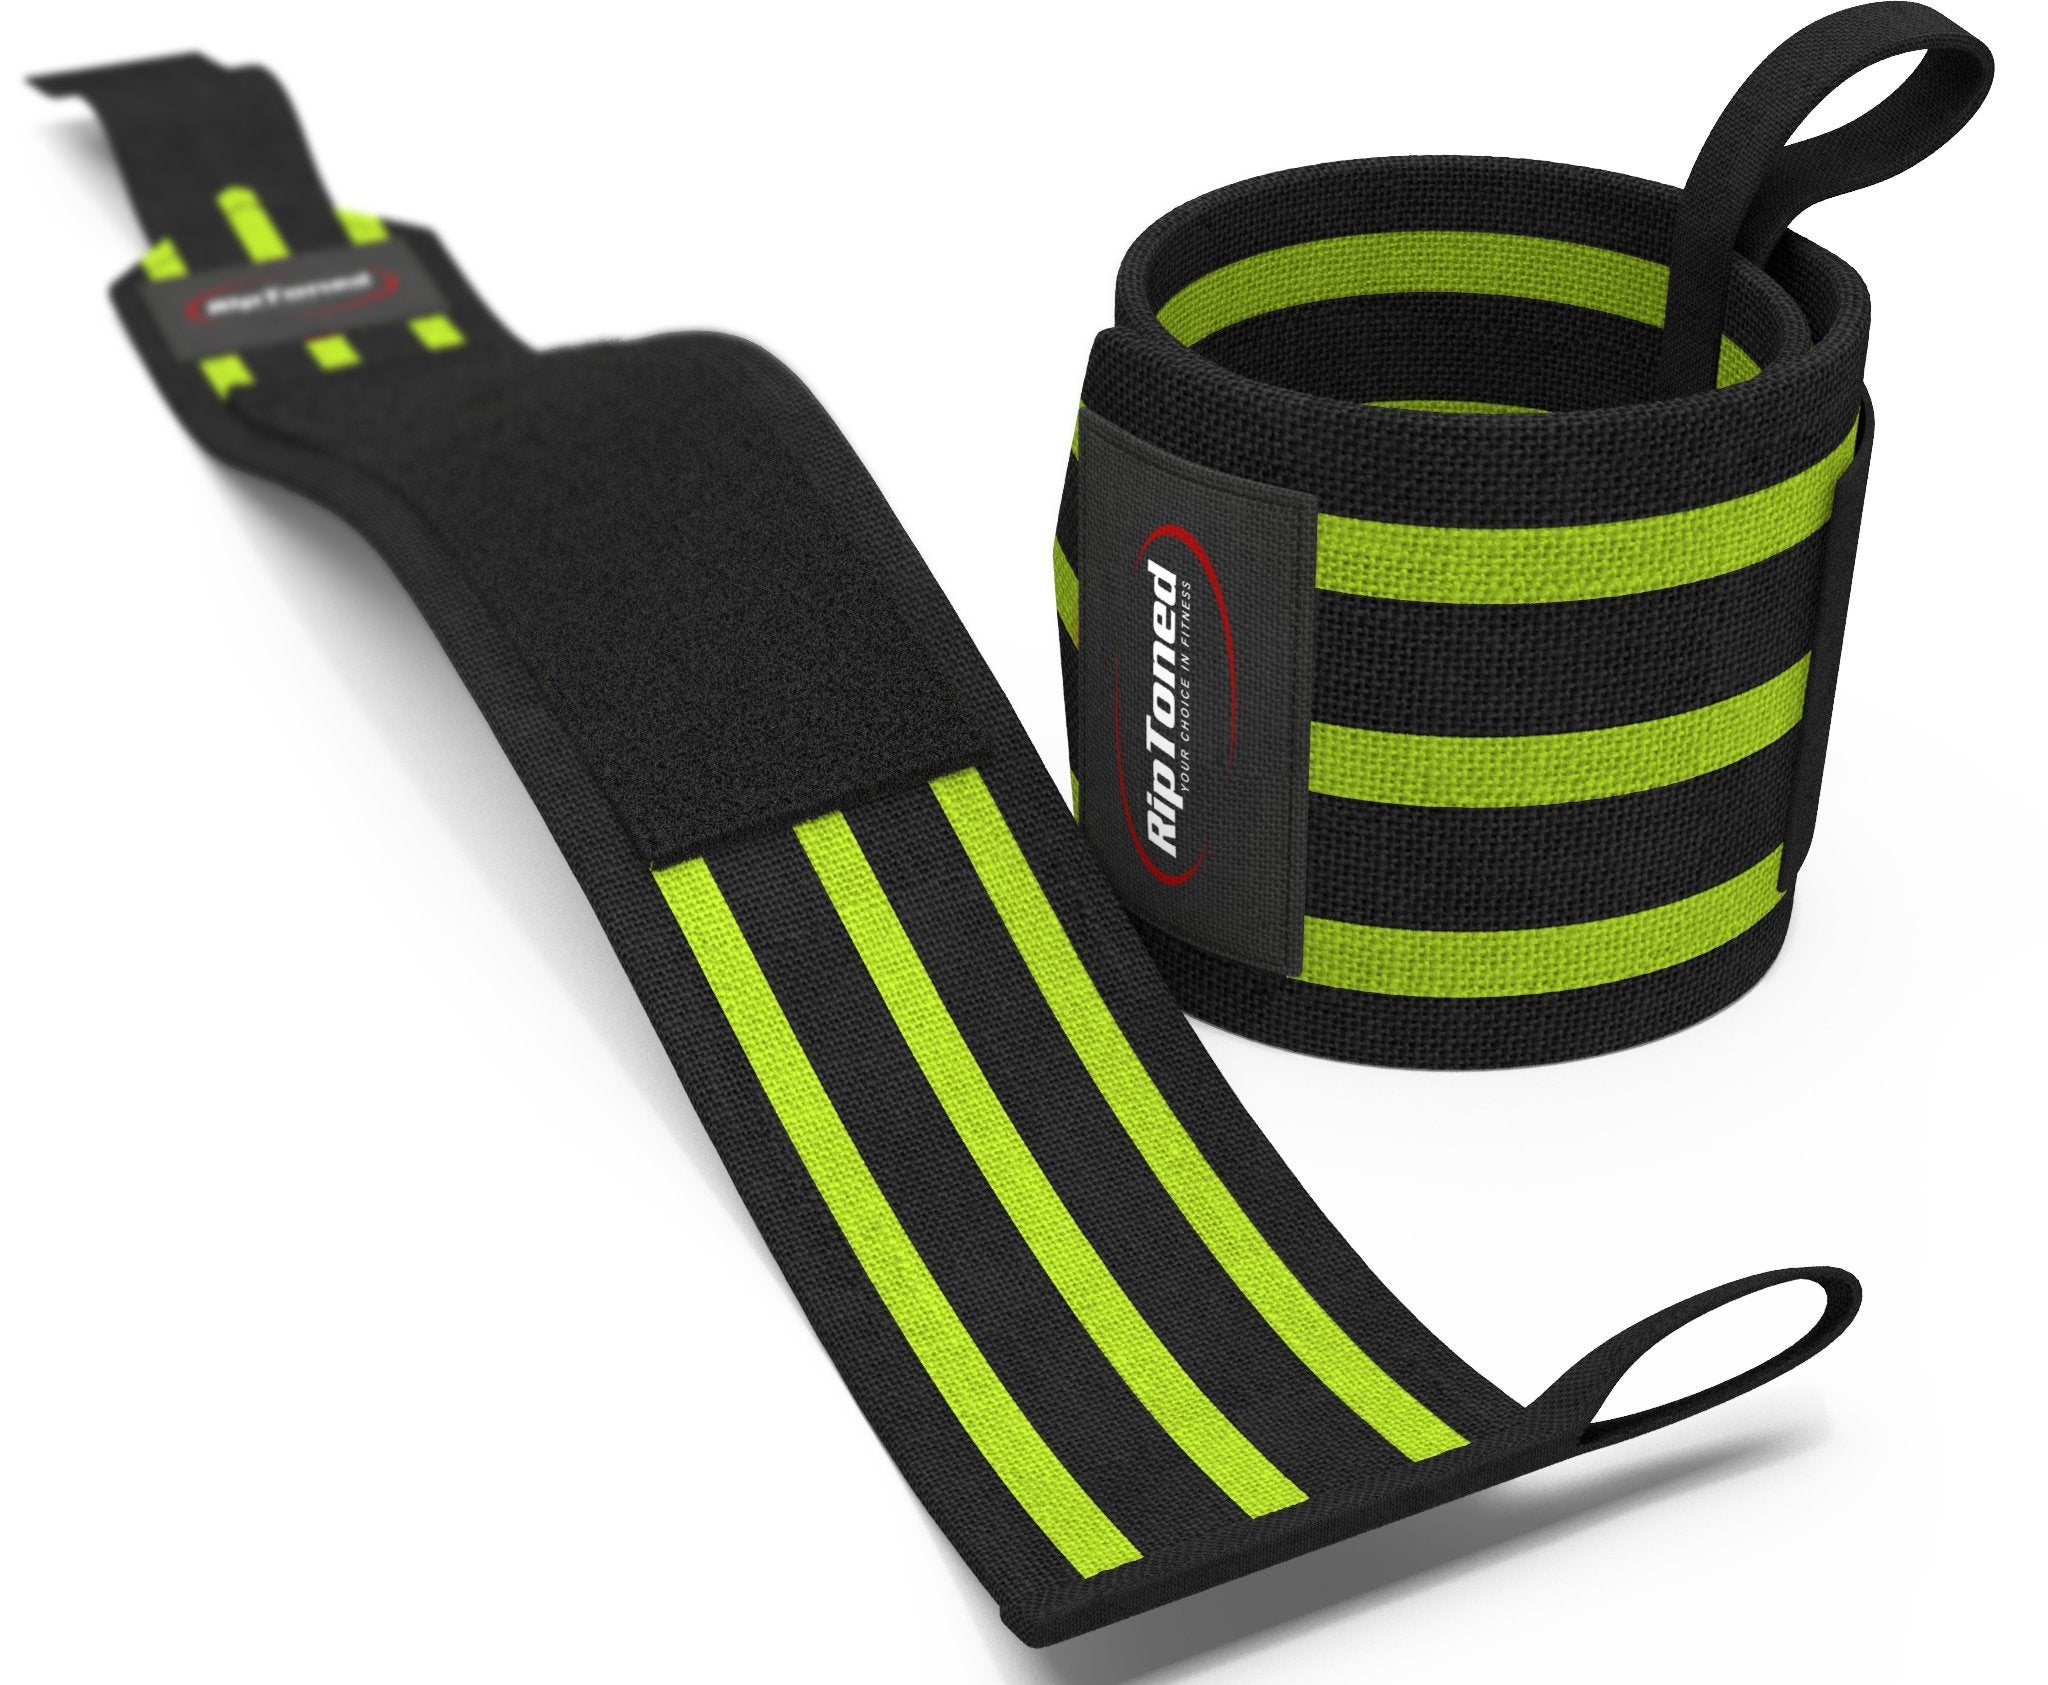 Rip Toned Wrist Wraps 18" Professional Grade with Thumb Loops - Wrist Support Braces for Men & Women - Weight Lifting, Crossfit, Powerlifting, Strength Training - Bonus Ebook (Green Stiff)